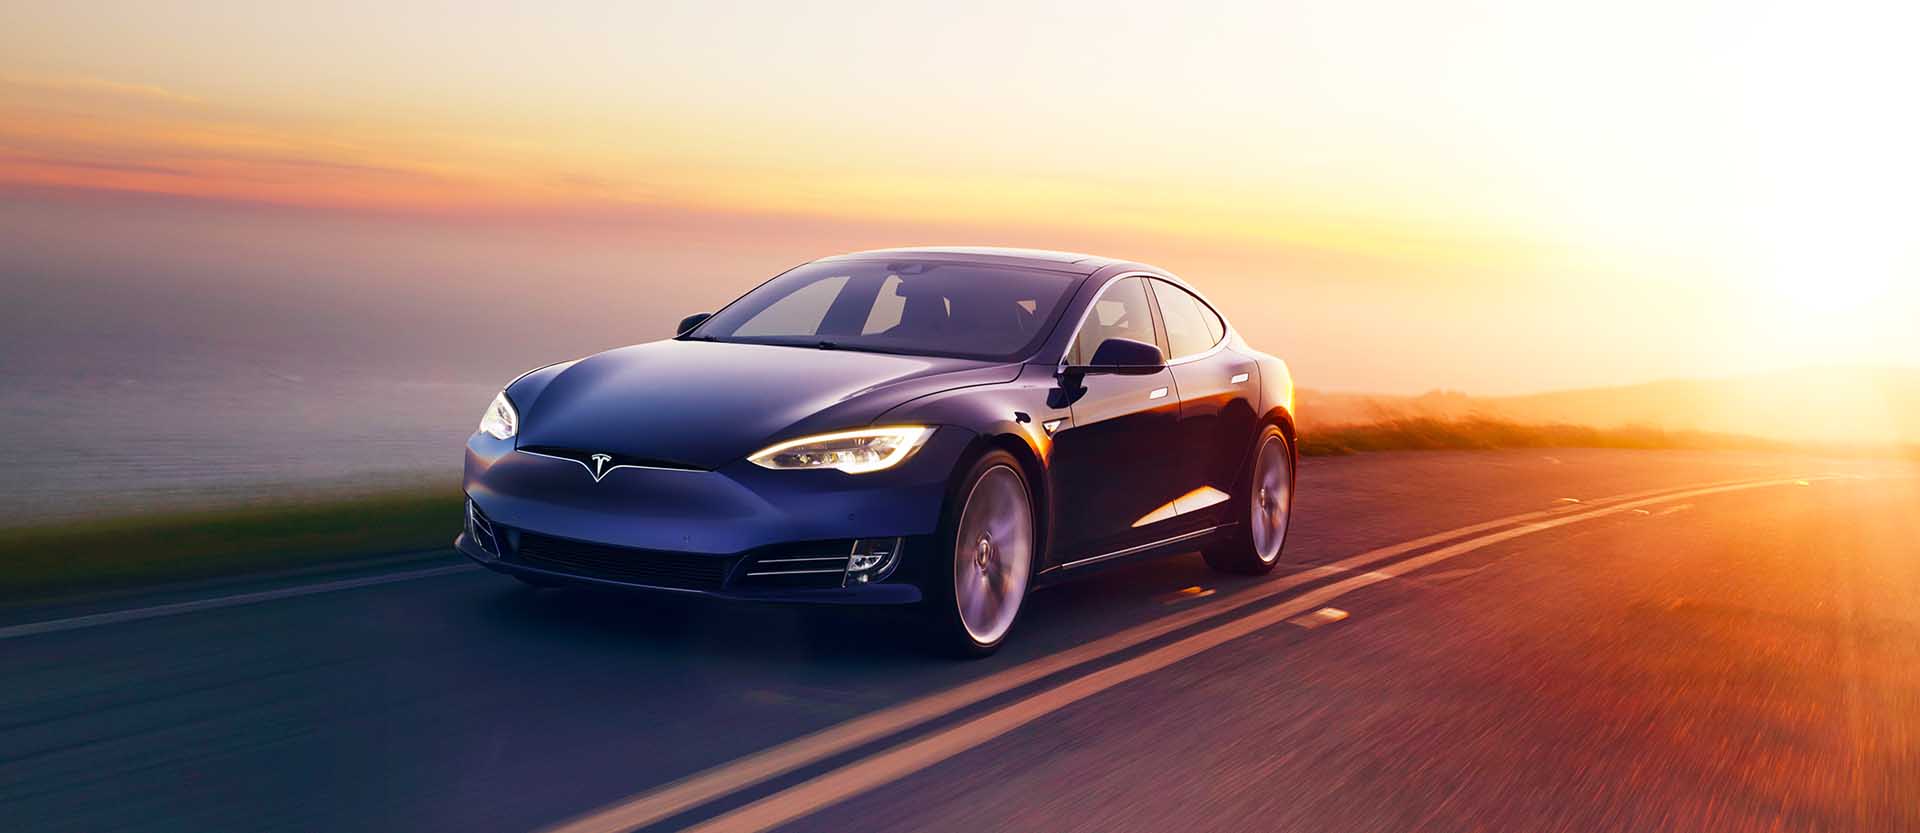 The Future of Driving: Tesla Model S Takes the Lead